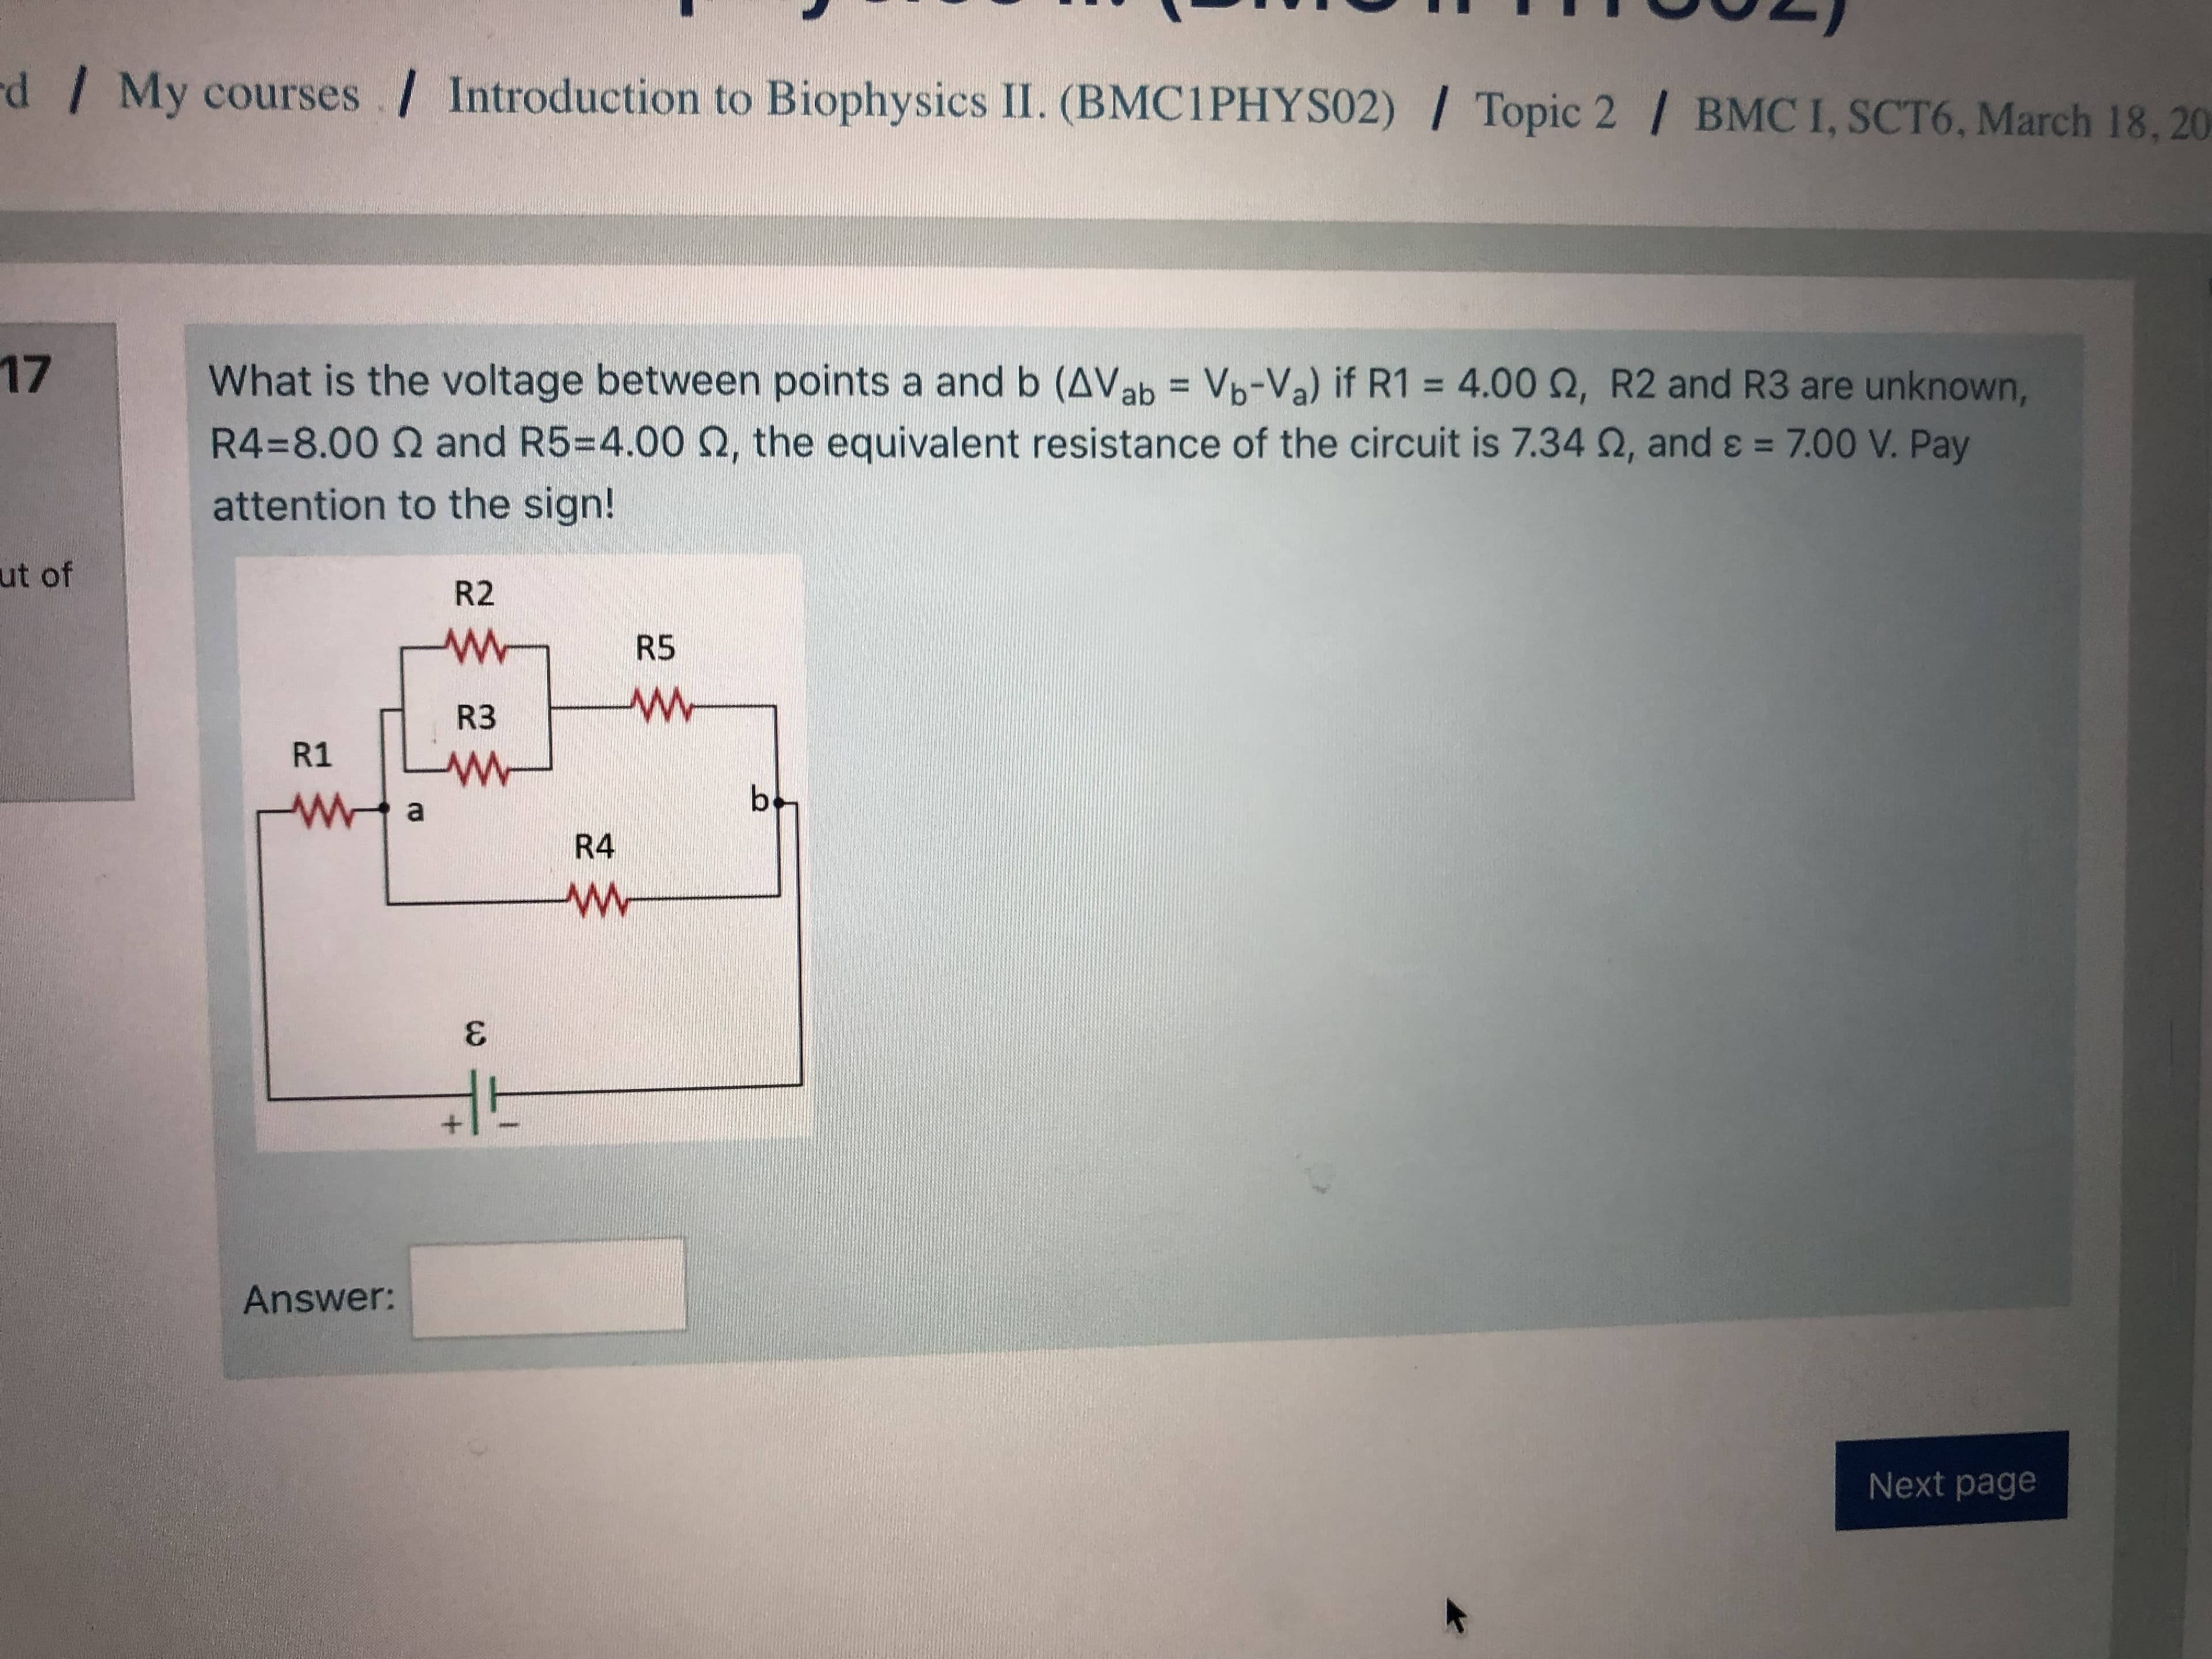 What is the voltage between points a andb (AVab = Vb-Va) if R1 = 4.00 Q, R2 and R3 are unknown,
R4=8.00 Q and R5=D4.00 Q, the equivalent resistance of the circuit is 7.34 2, and ɛ = 7.00 V. Pay
%3D
attention to the sign!
